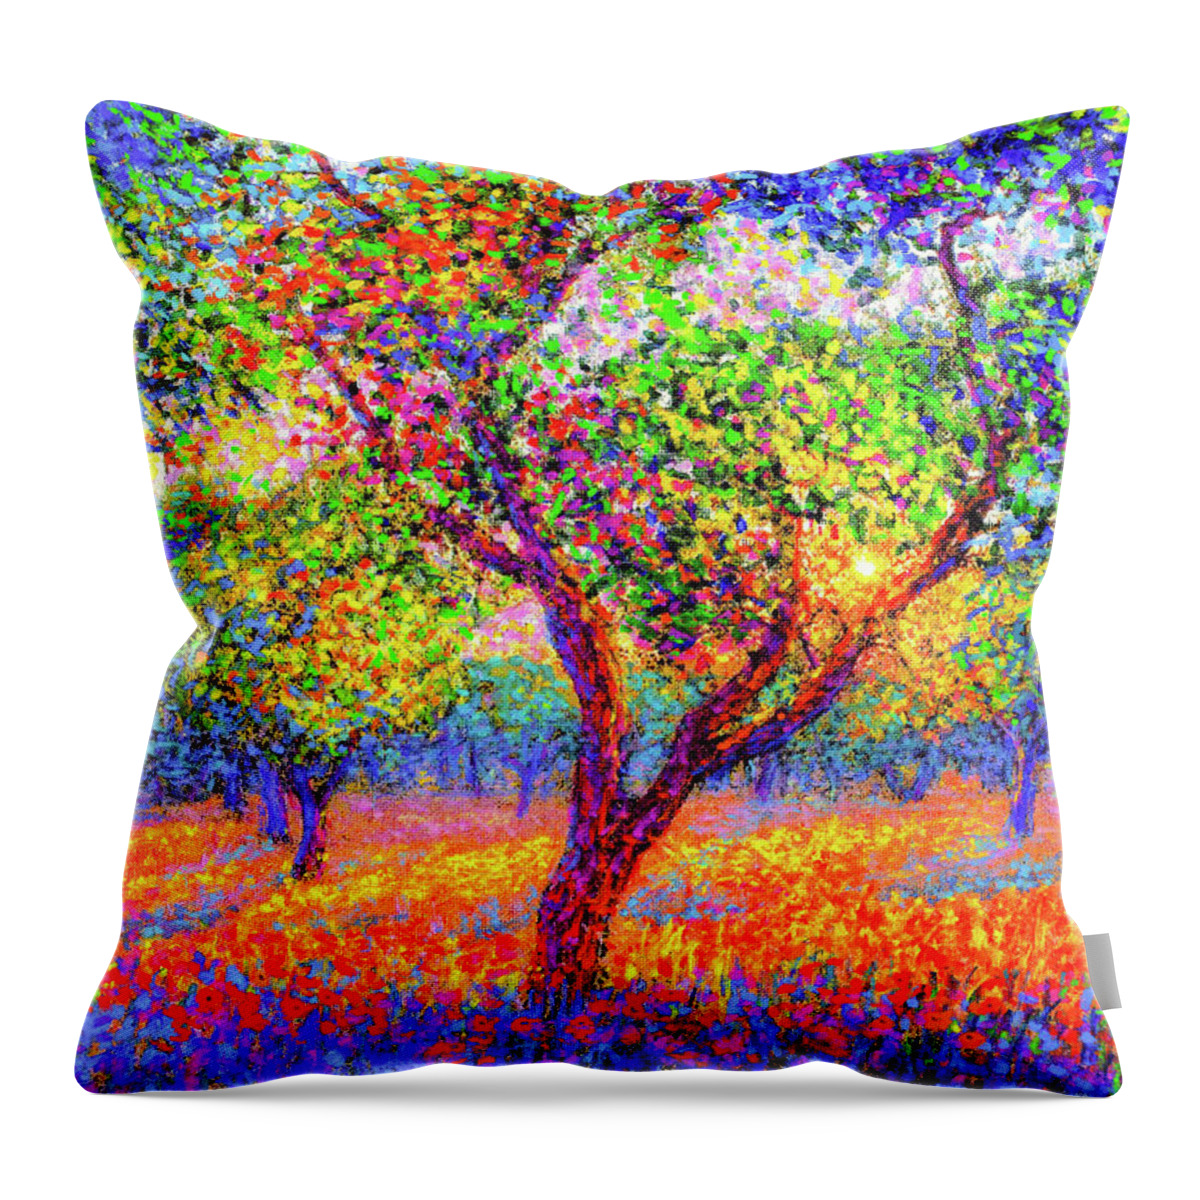 Floral Throw Pillow featuring the painting Evening Poppies by Jane Small